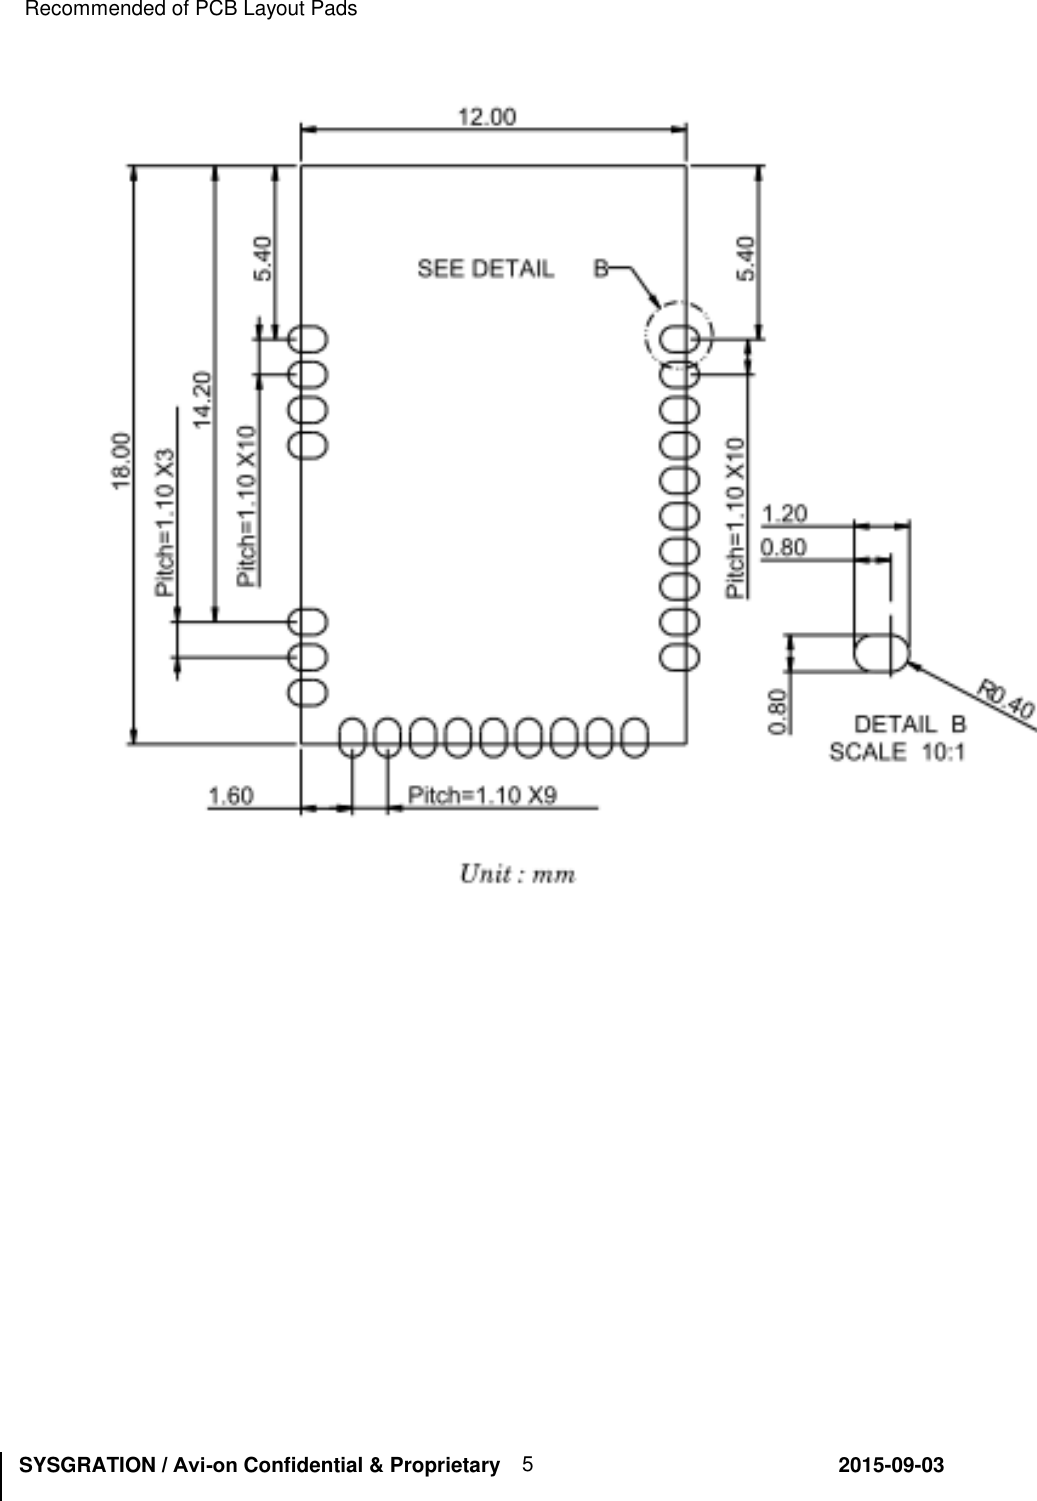 SYSGRATION / Avi-on Confidential &amp; Proprietary                                                       2015-09-03 5  Recommended of PCB Layout Pads 